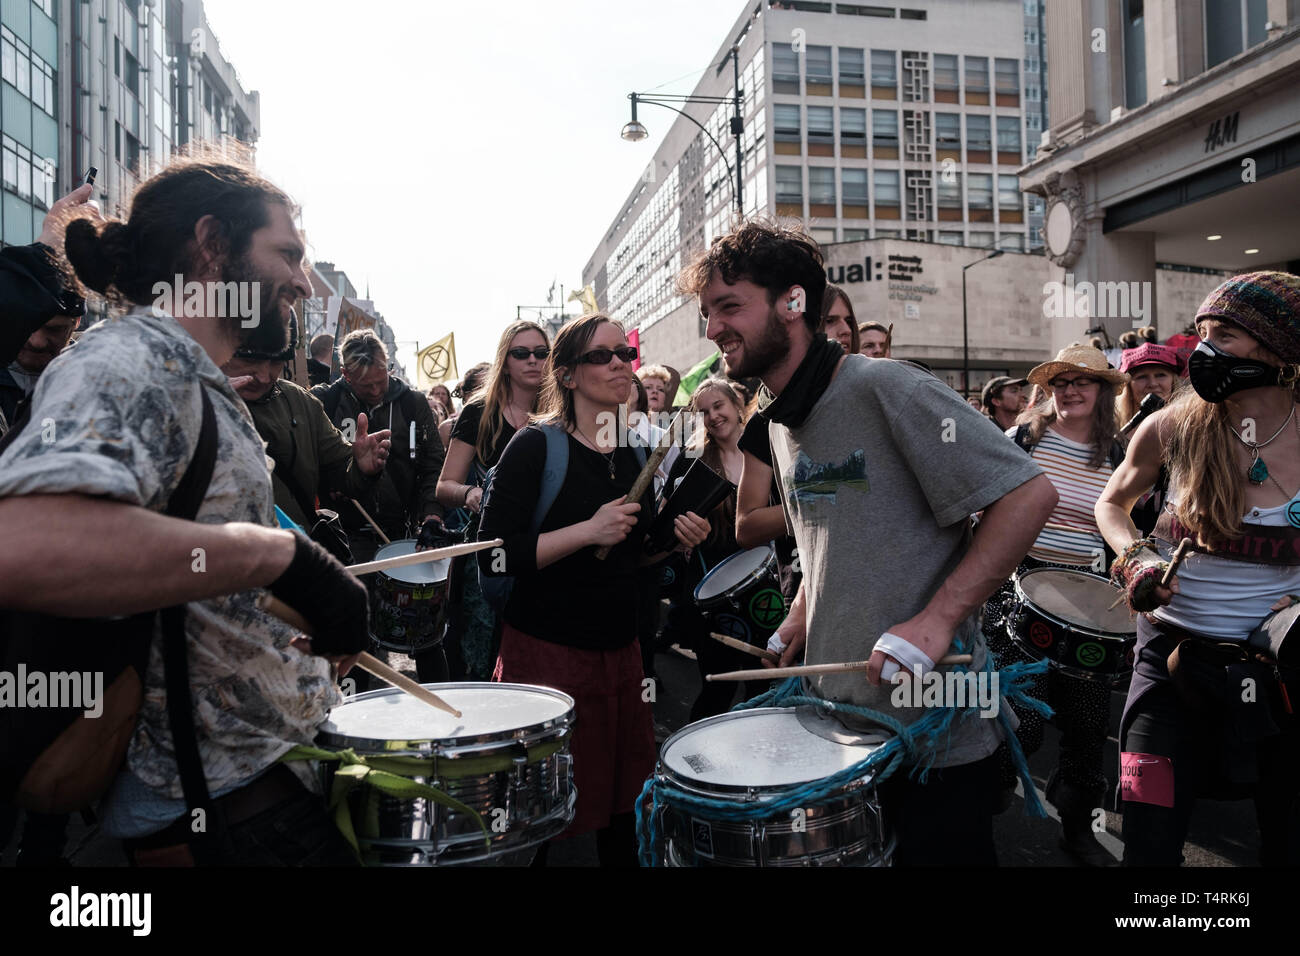 London, UK. 18th Apr, 2019. Protesters playing music during the Extinction Rebellion Strike in London.Extinction Rebellion have blocked five central London landmarks for fourth day in protest against government inaction on climate change. Credit: Sam Lees/SOPA Images/ZUMA Wire/Alamy Live News Stock Photo